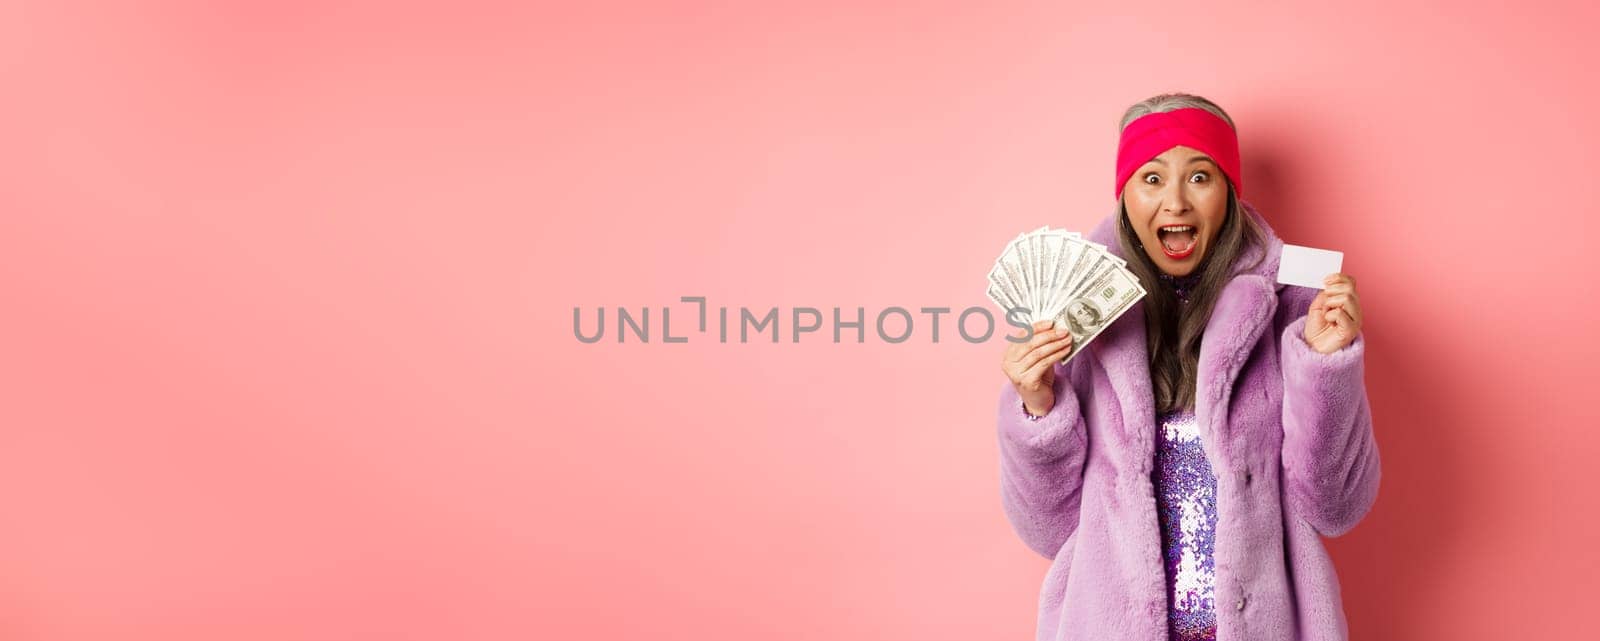 Shopping and fashion concept. Excited asian senior woman going buy something with money and plastic credit card, scream of joy and happiness, pink background.